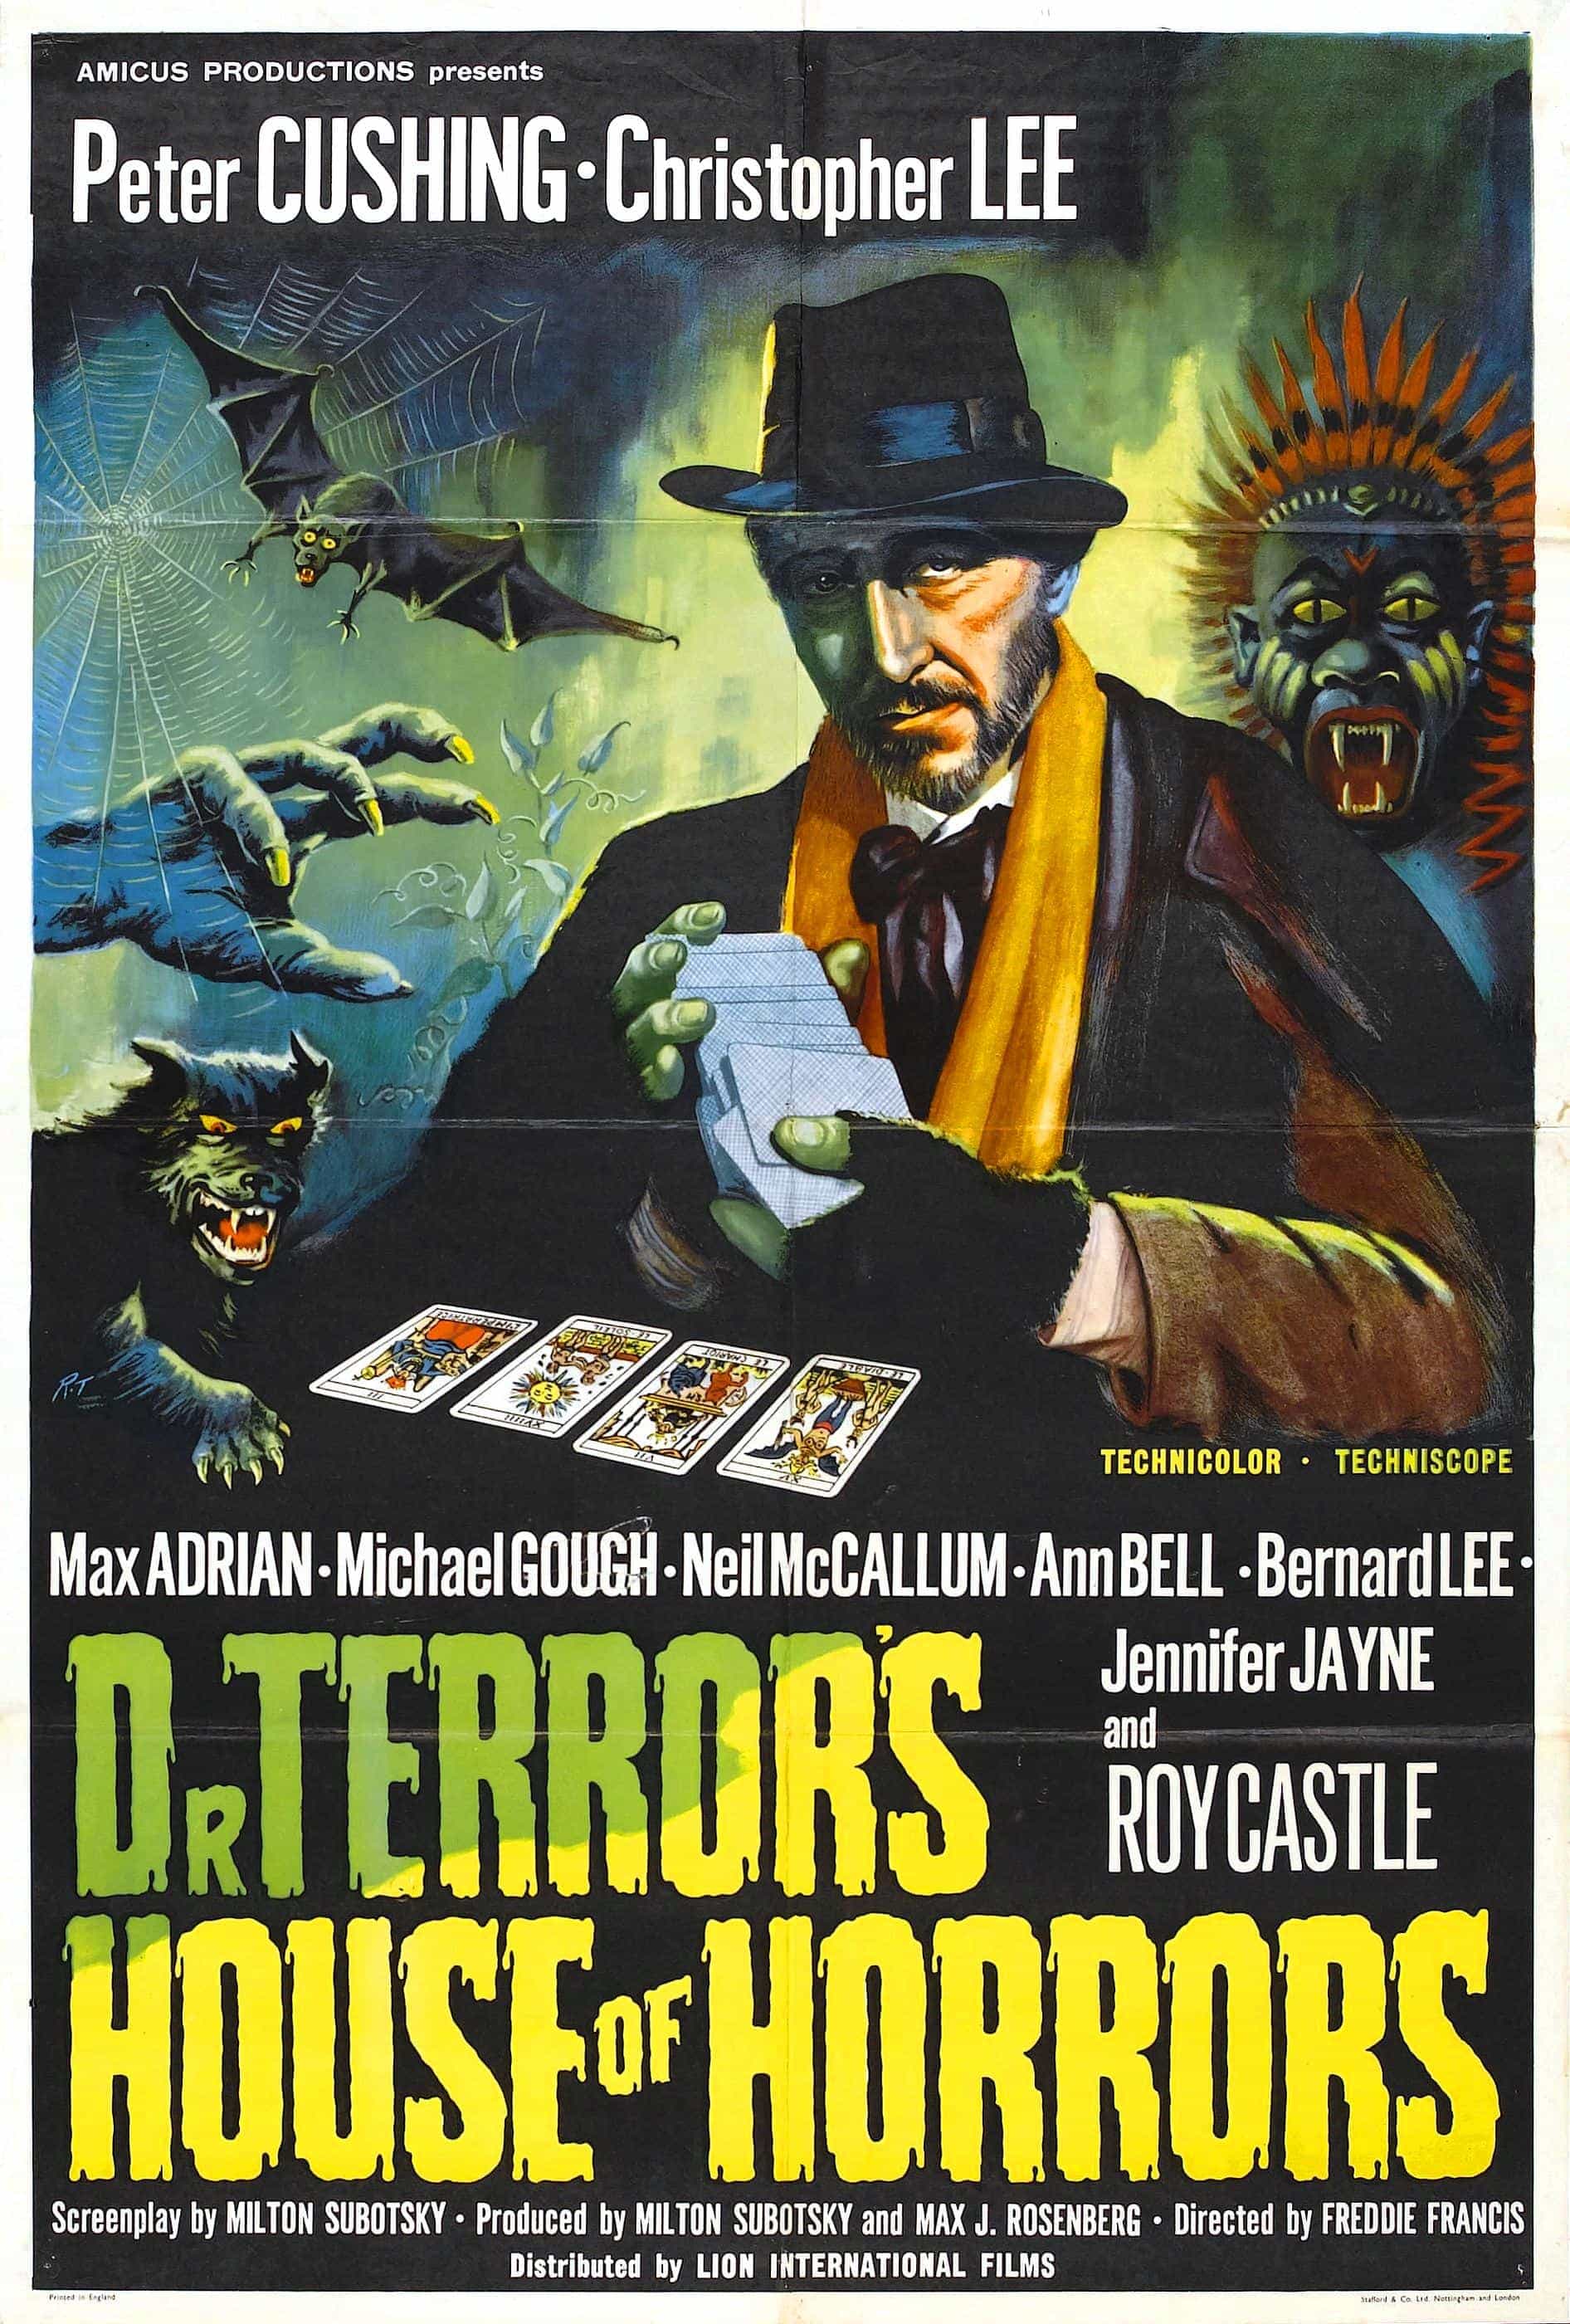 Dr. Terrors House of Horrors